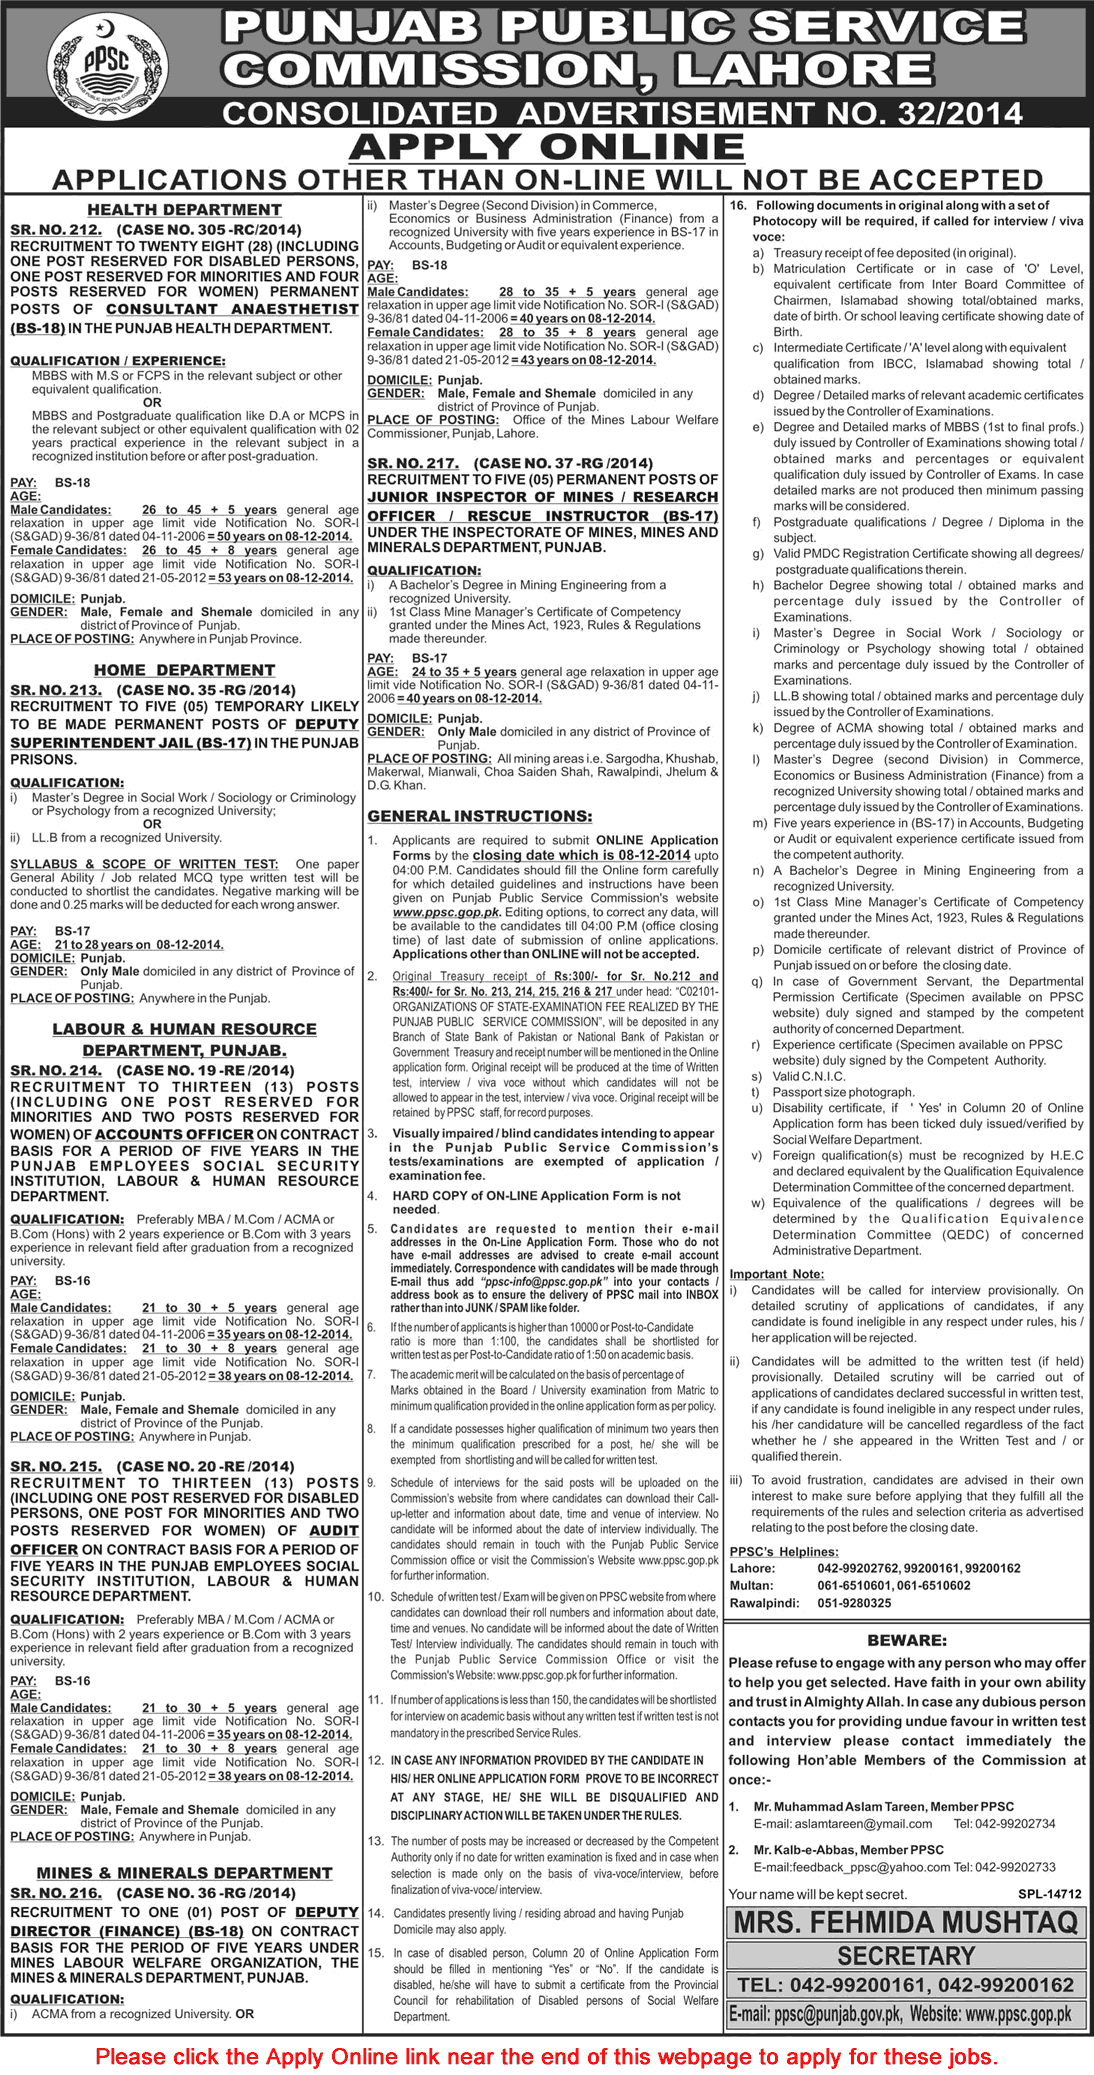 PPSC Jobs November 2014 Apply Online Consolidated Ad 32/2014